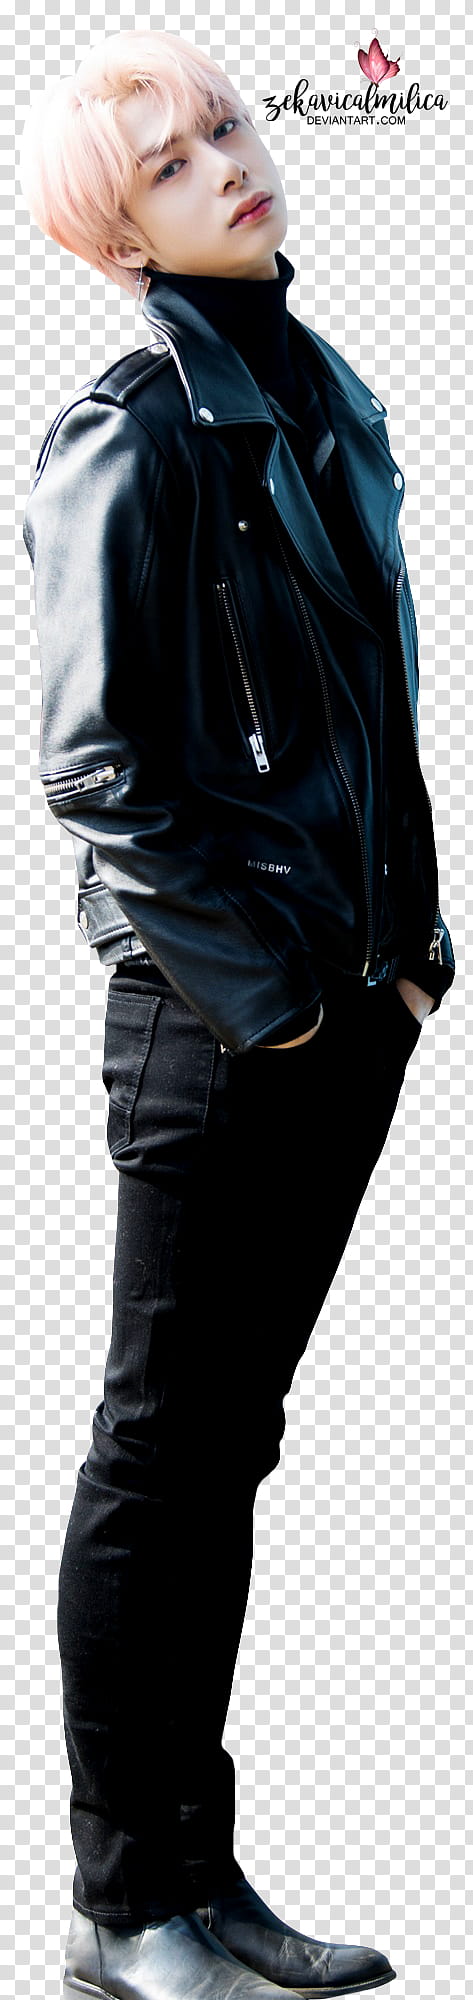 Monsta X Hyungwon Jealousy x Naver, man wearing black leather jacket transparent background PNG clipart